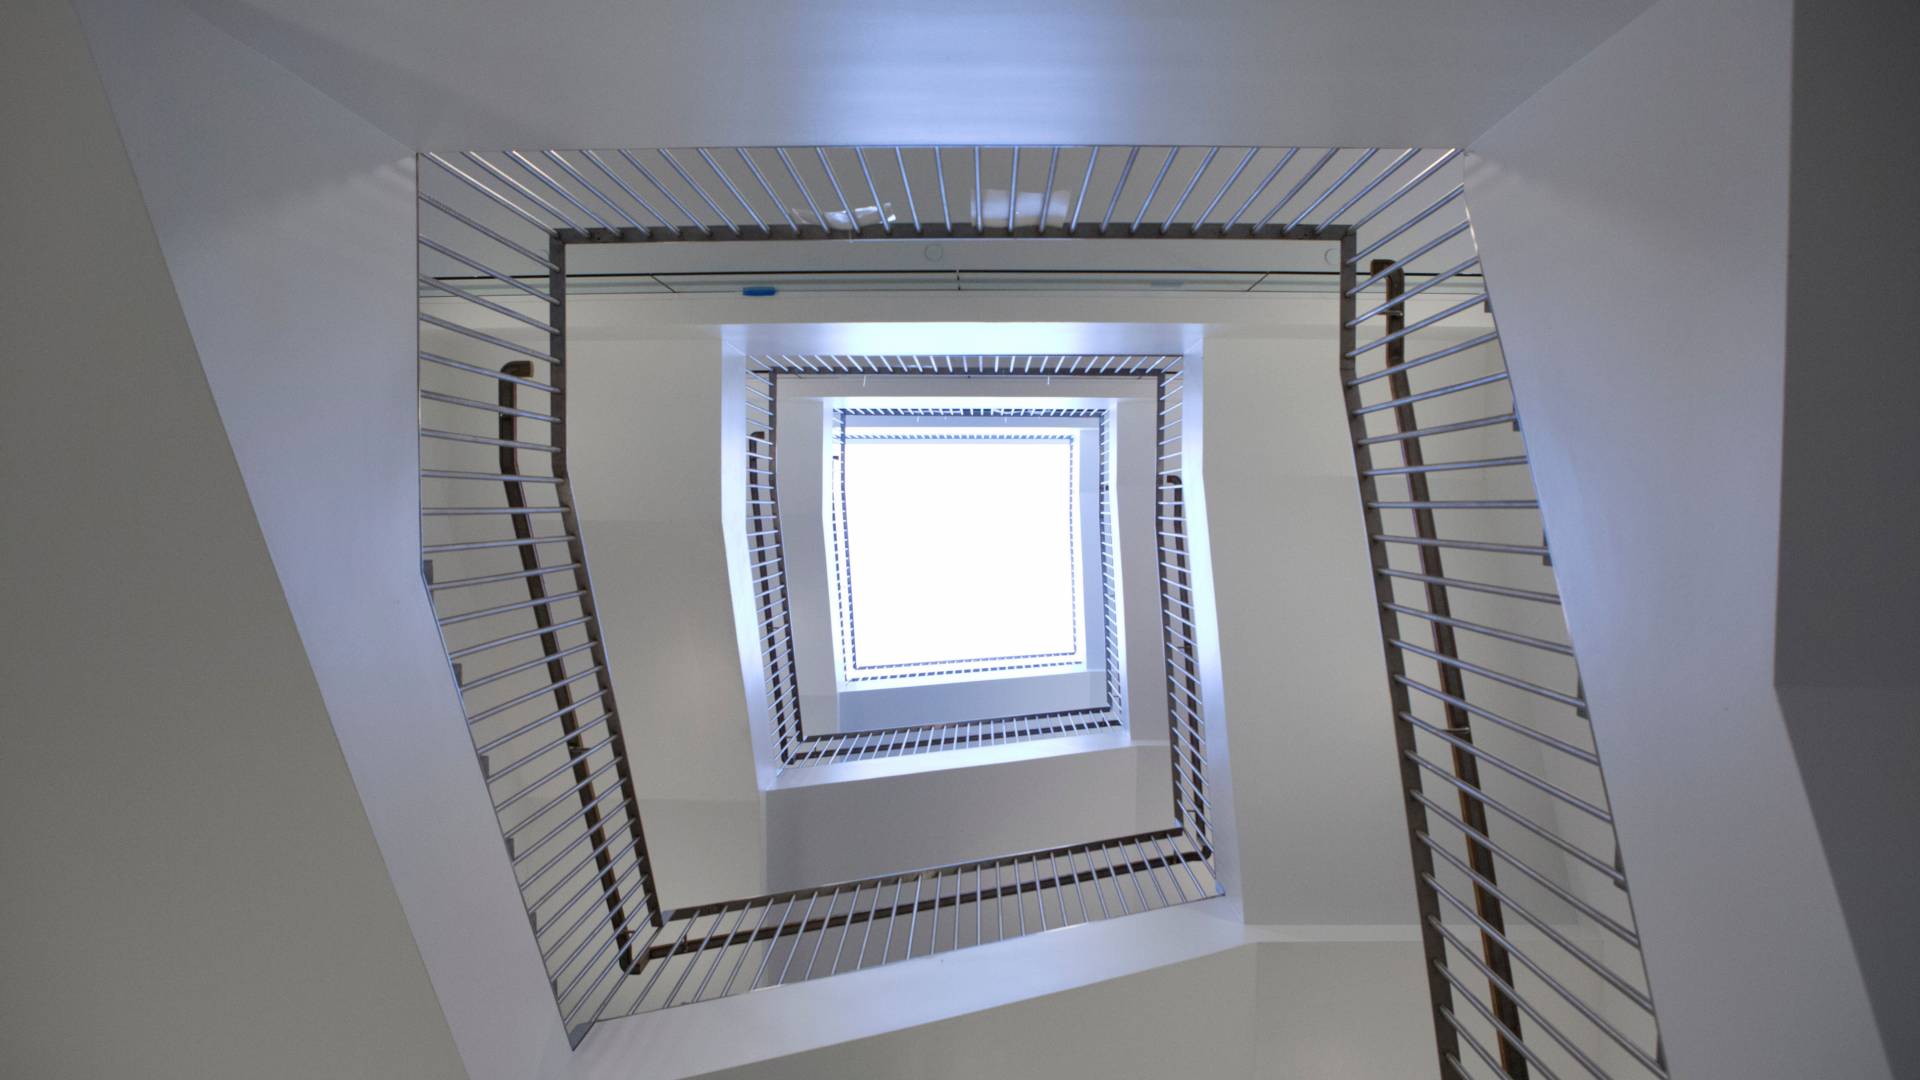 Looking up through a stairwell into a skylight